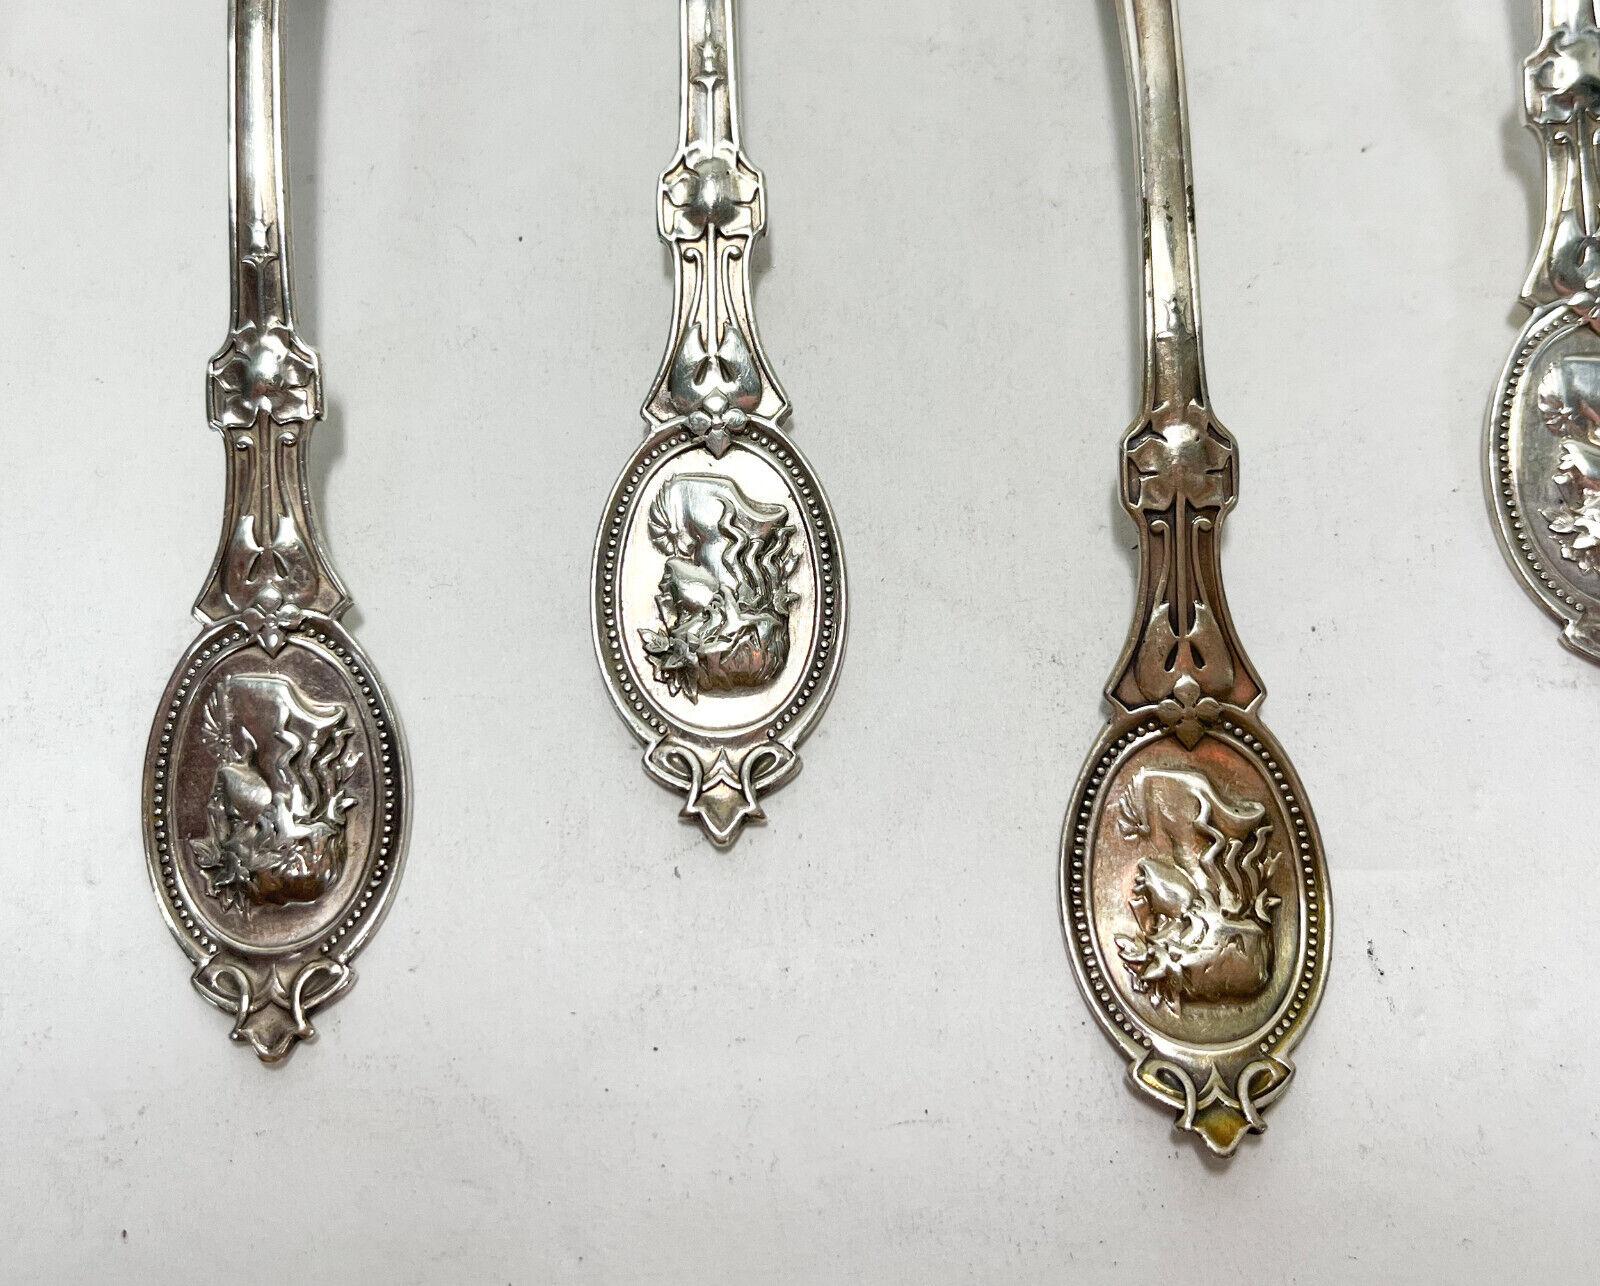 8 Hotchkiss & Schreuder sterling silver medallion grapefruit spoons, Late 19th Century. Etched flowers with an etched warrior figure to the finial. Hotchkiss & Schreuder hallmark to the verso handle.

Additional Information: 
Type: Grapefruit